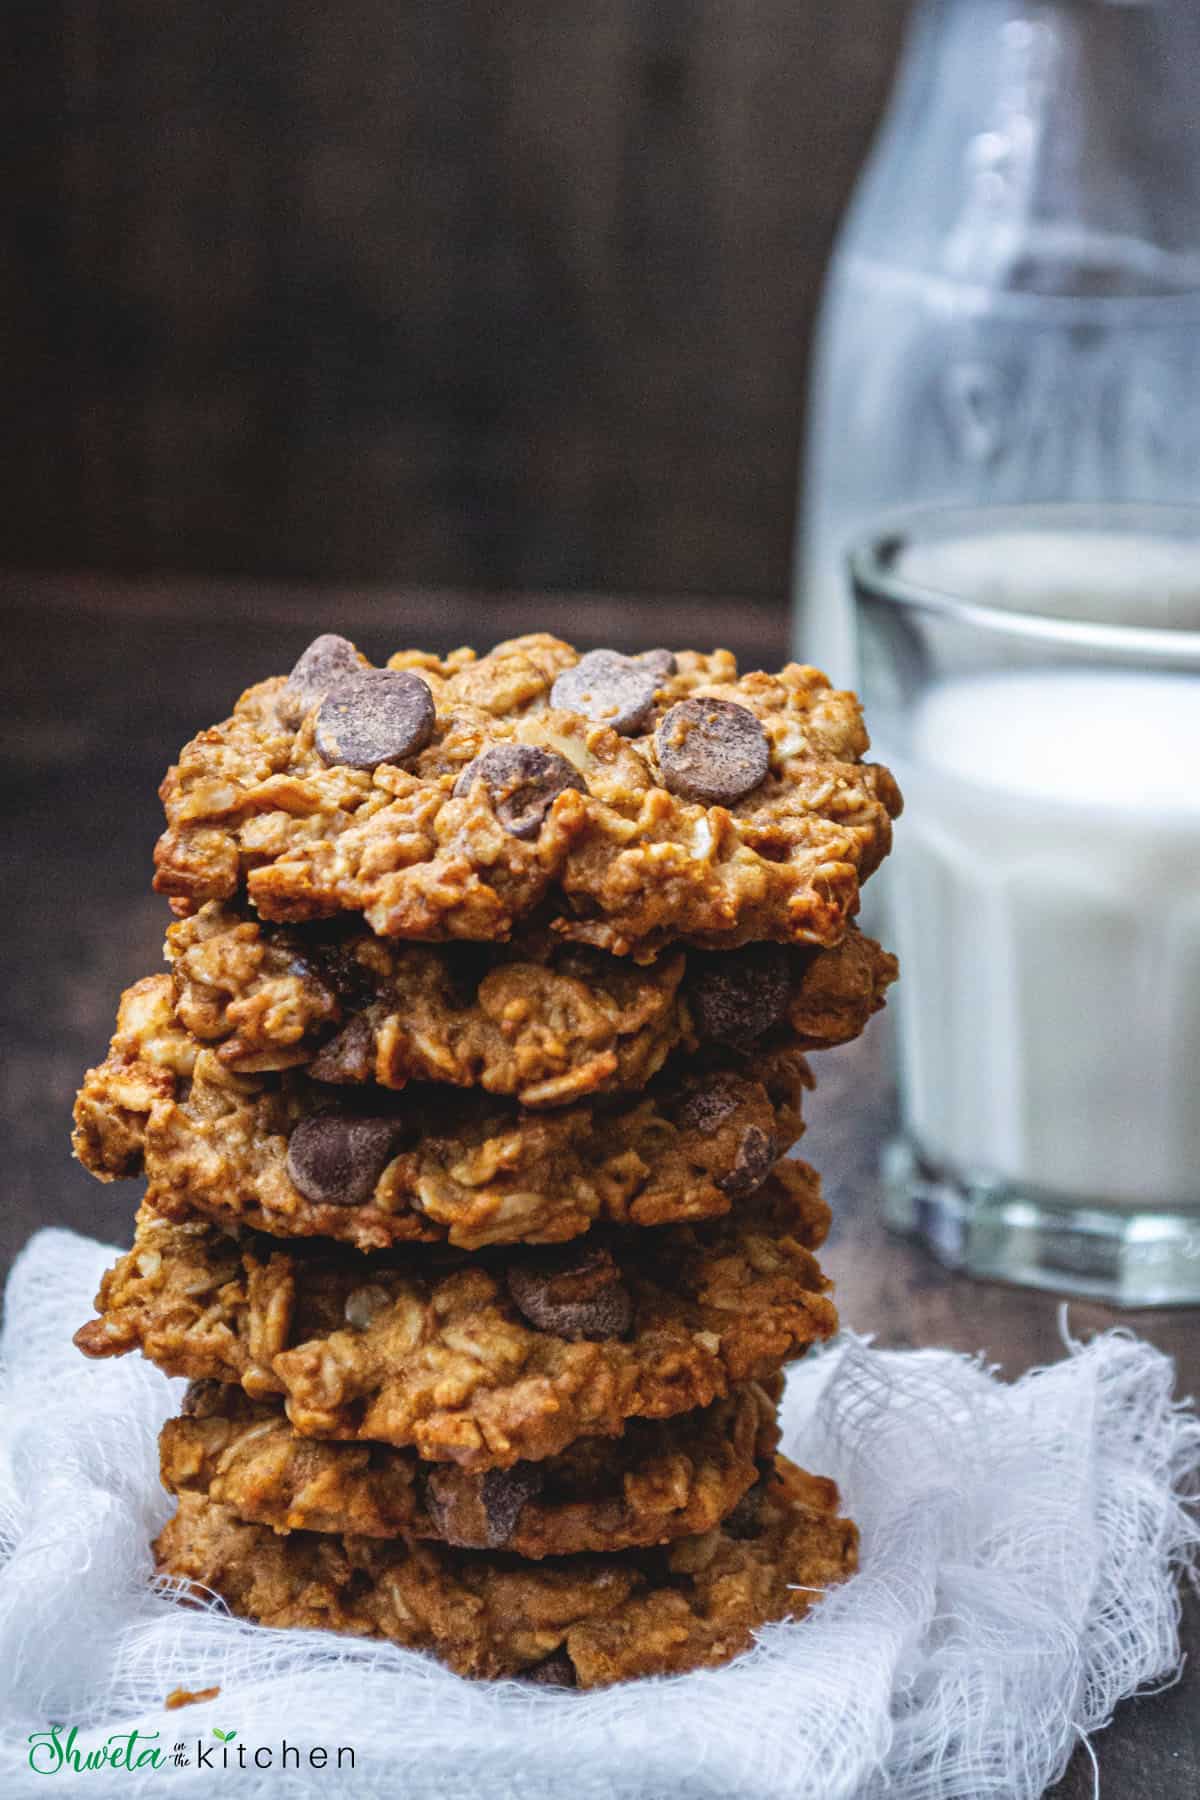 Six chocolate chip oatmeal cookies stacked on top of each other in front of a glass of milk